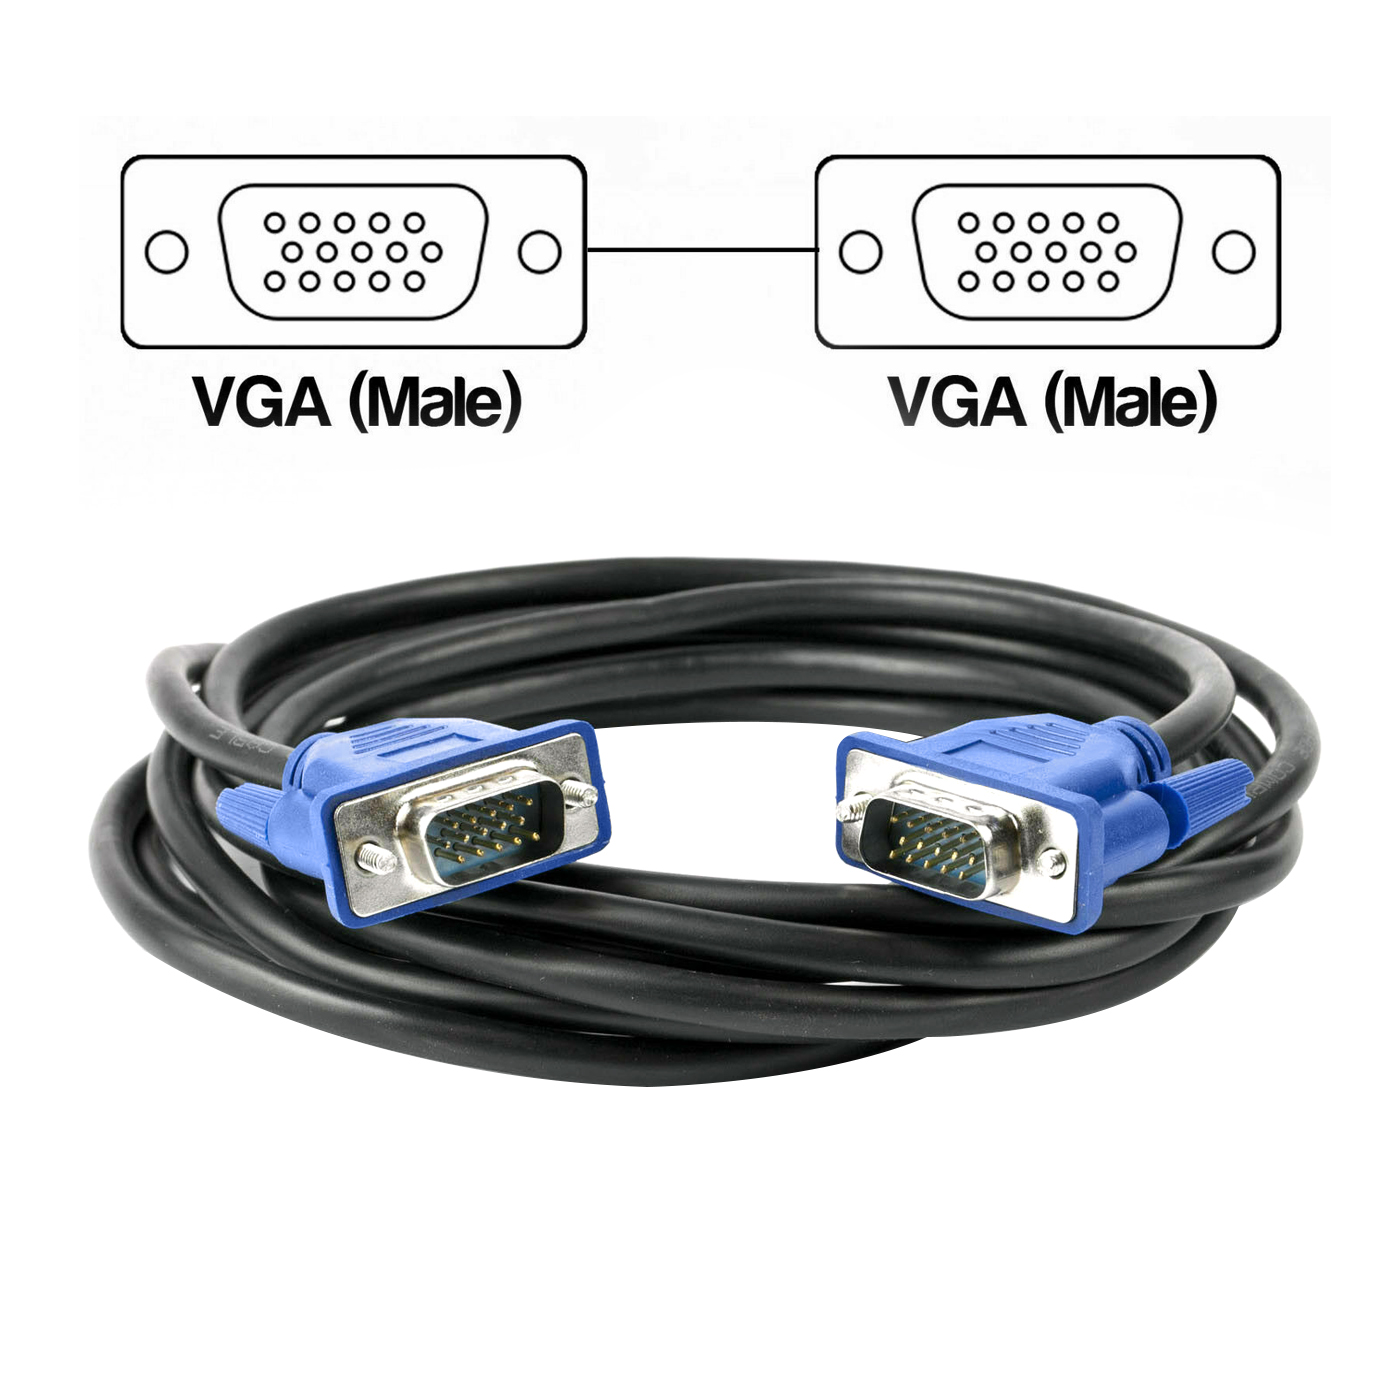 10m VGA Cable Male to Male D-Sub Plug 15 Pin Monitor Cable PC TV Laptop LCD SVGA 